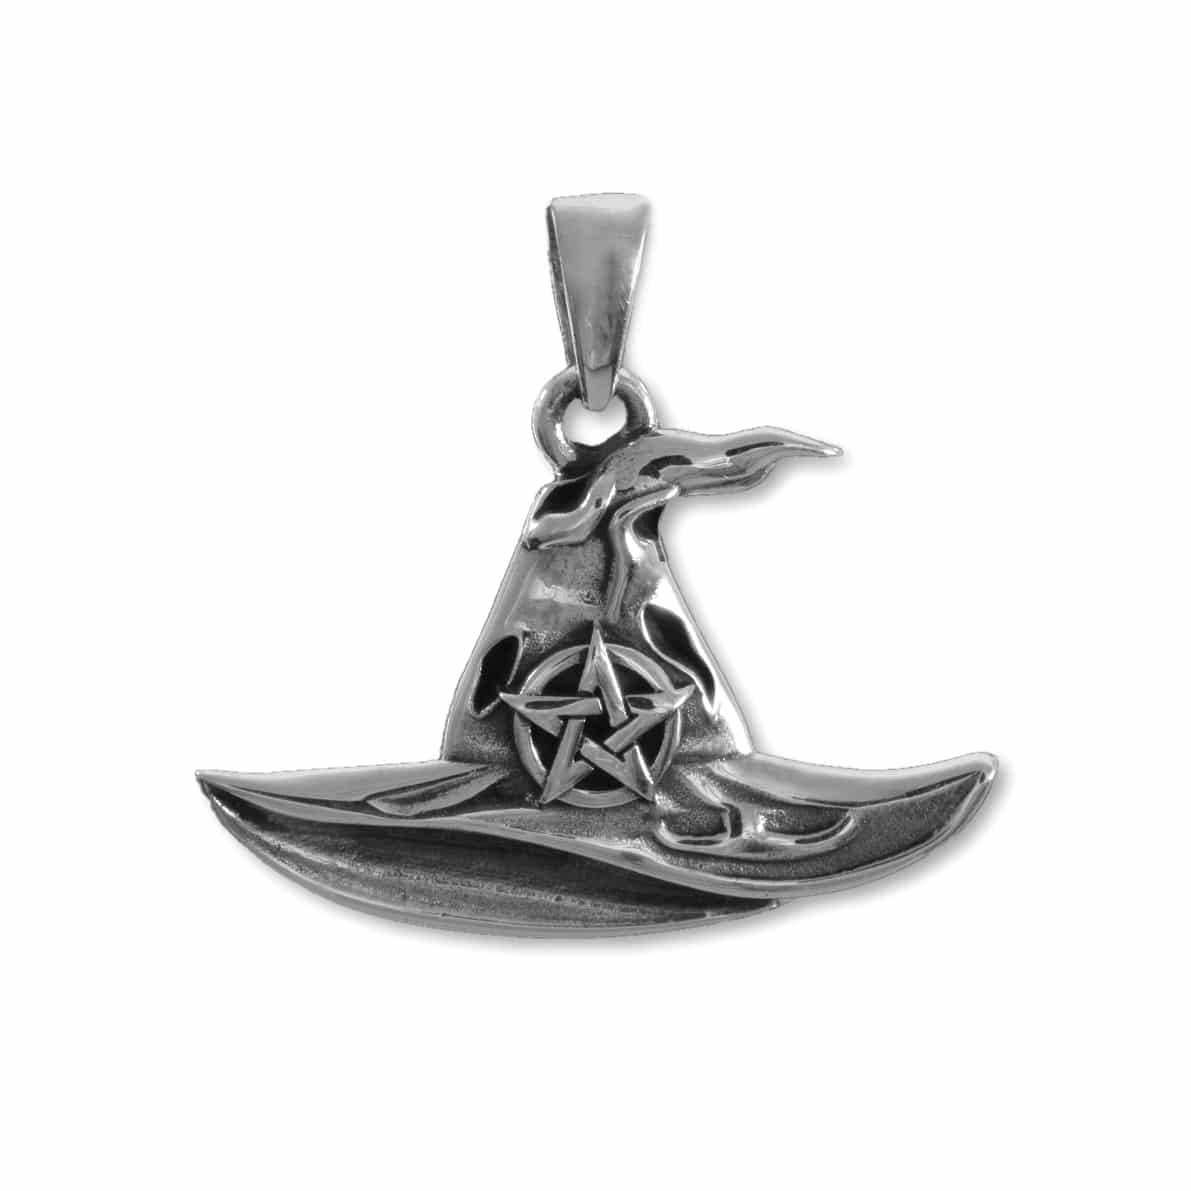 2pcs Stainless Steel Witch Hat Charm, Witch Hat Pendant, Cap Charm, Halloween Charms, Witchy Charms, Celestial Charms Witch Jewelry STL-3356